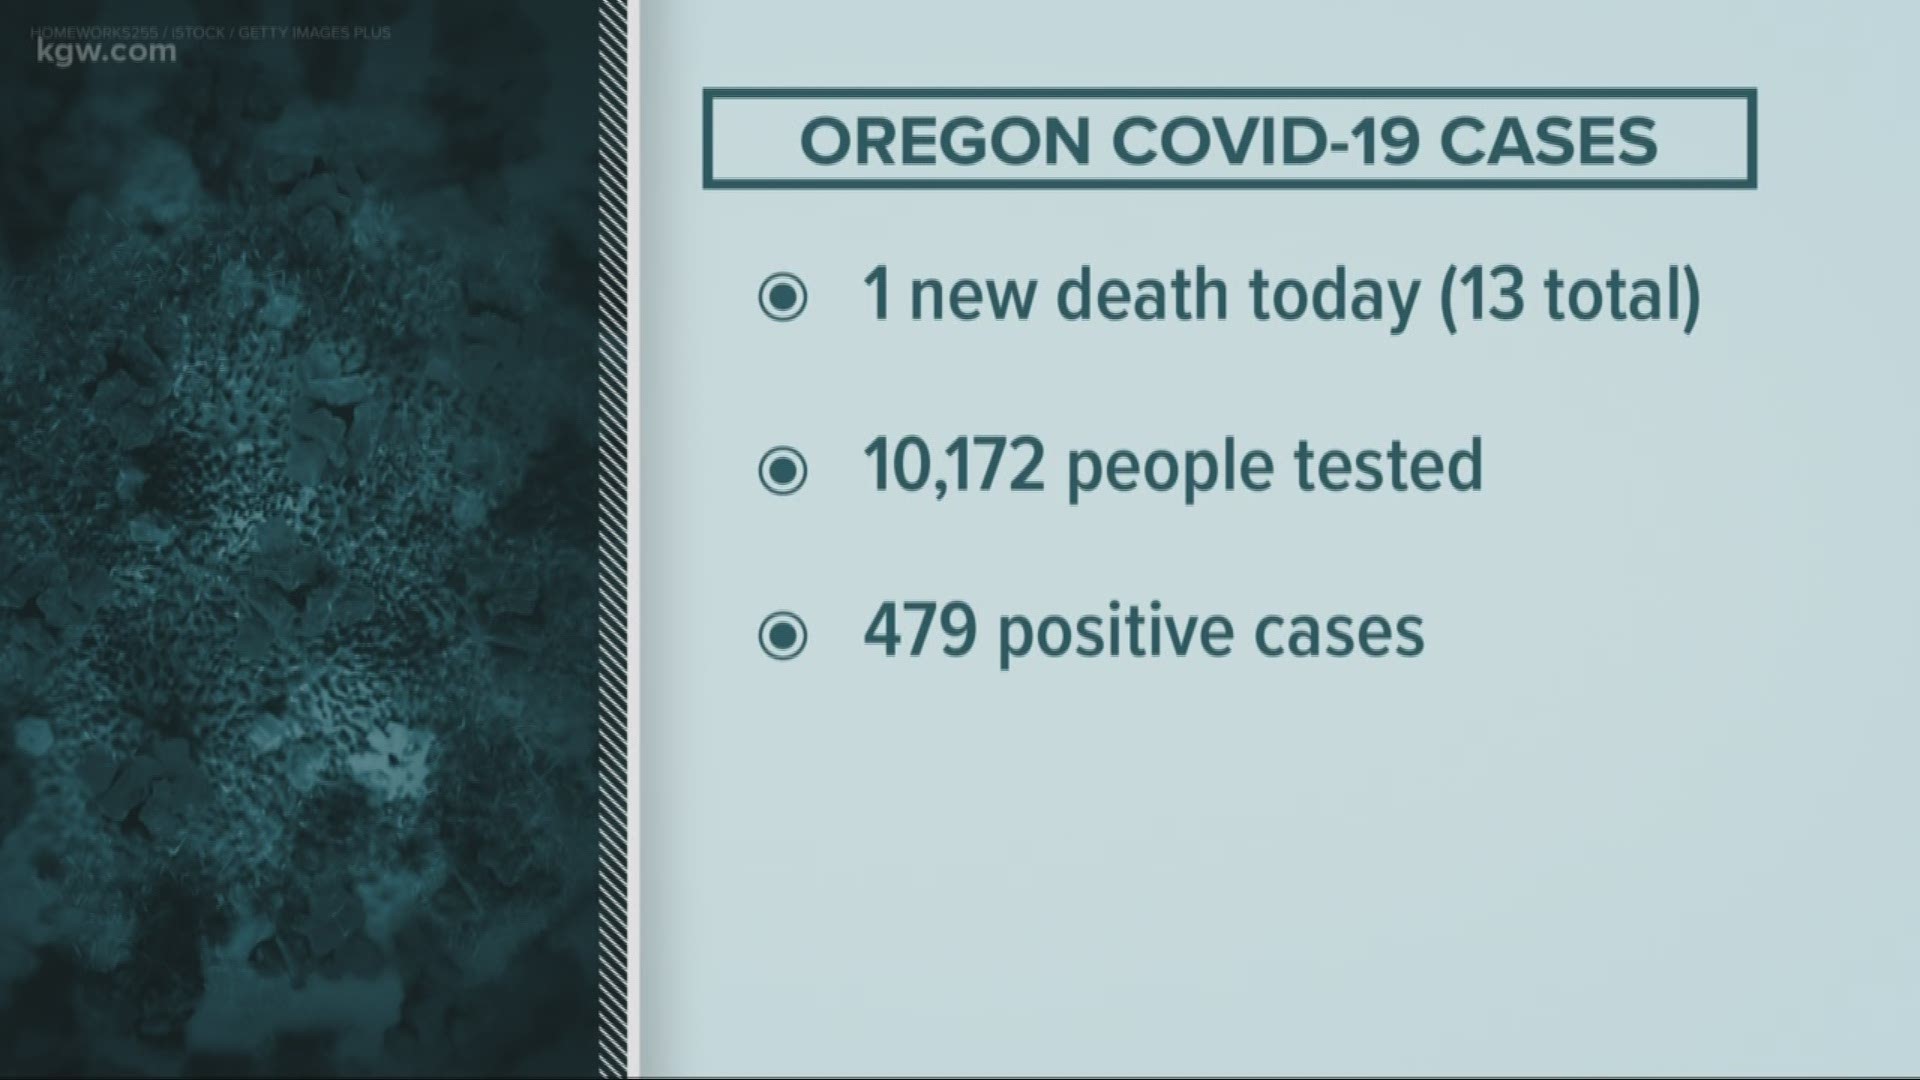 A 13th person has died due to coronavirus in Oregon. However, data shows that social distancing is working in the state.